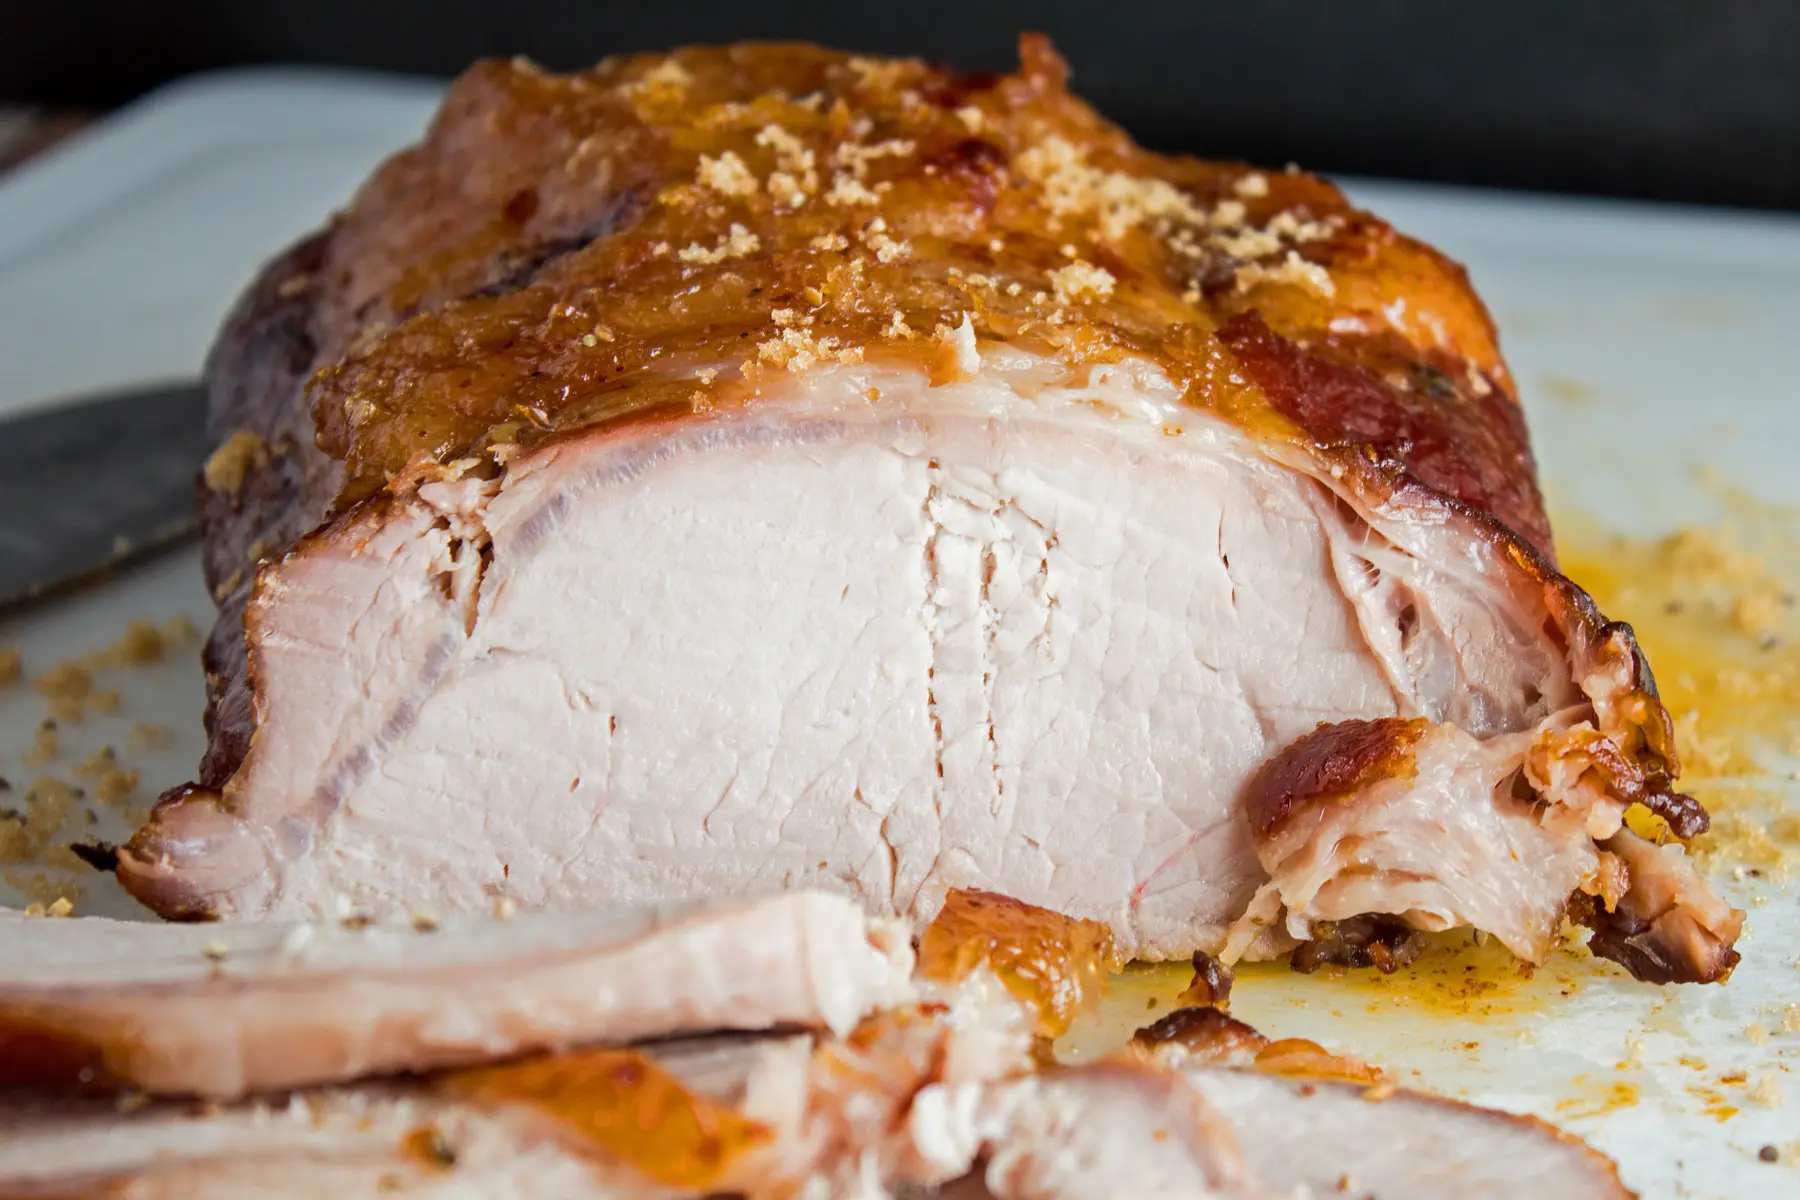 a close up image of apple cider marinate smoked pork loin with several slices cut away to show the tender, juicy smoked pork loin roast